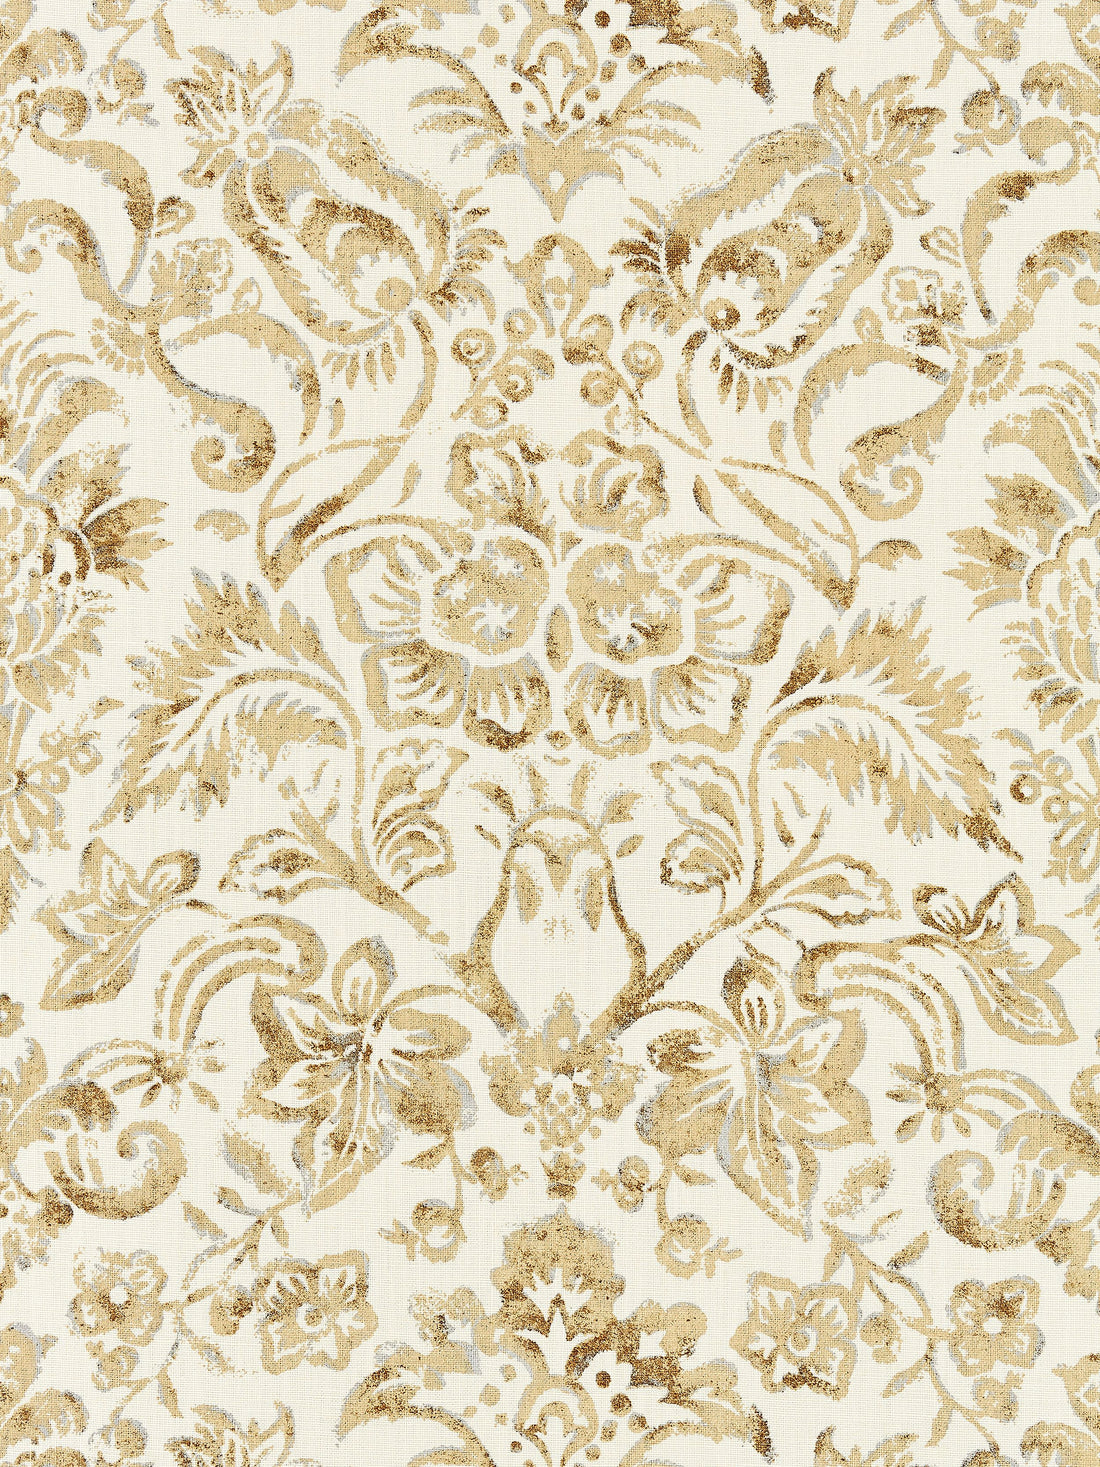 Mansfield Damask Print fabric in ivory and burnished gold color - pattern number SC 000116598 - by Scalamandre in the Scalamandre Fabrics Book 1 collection